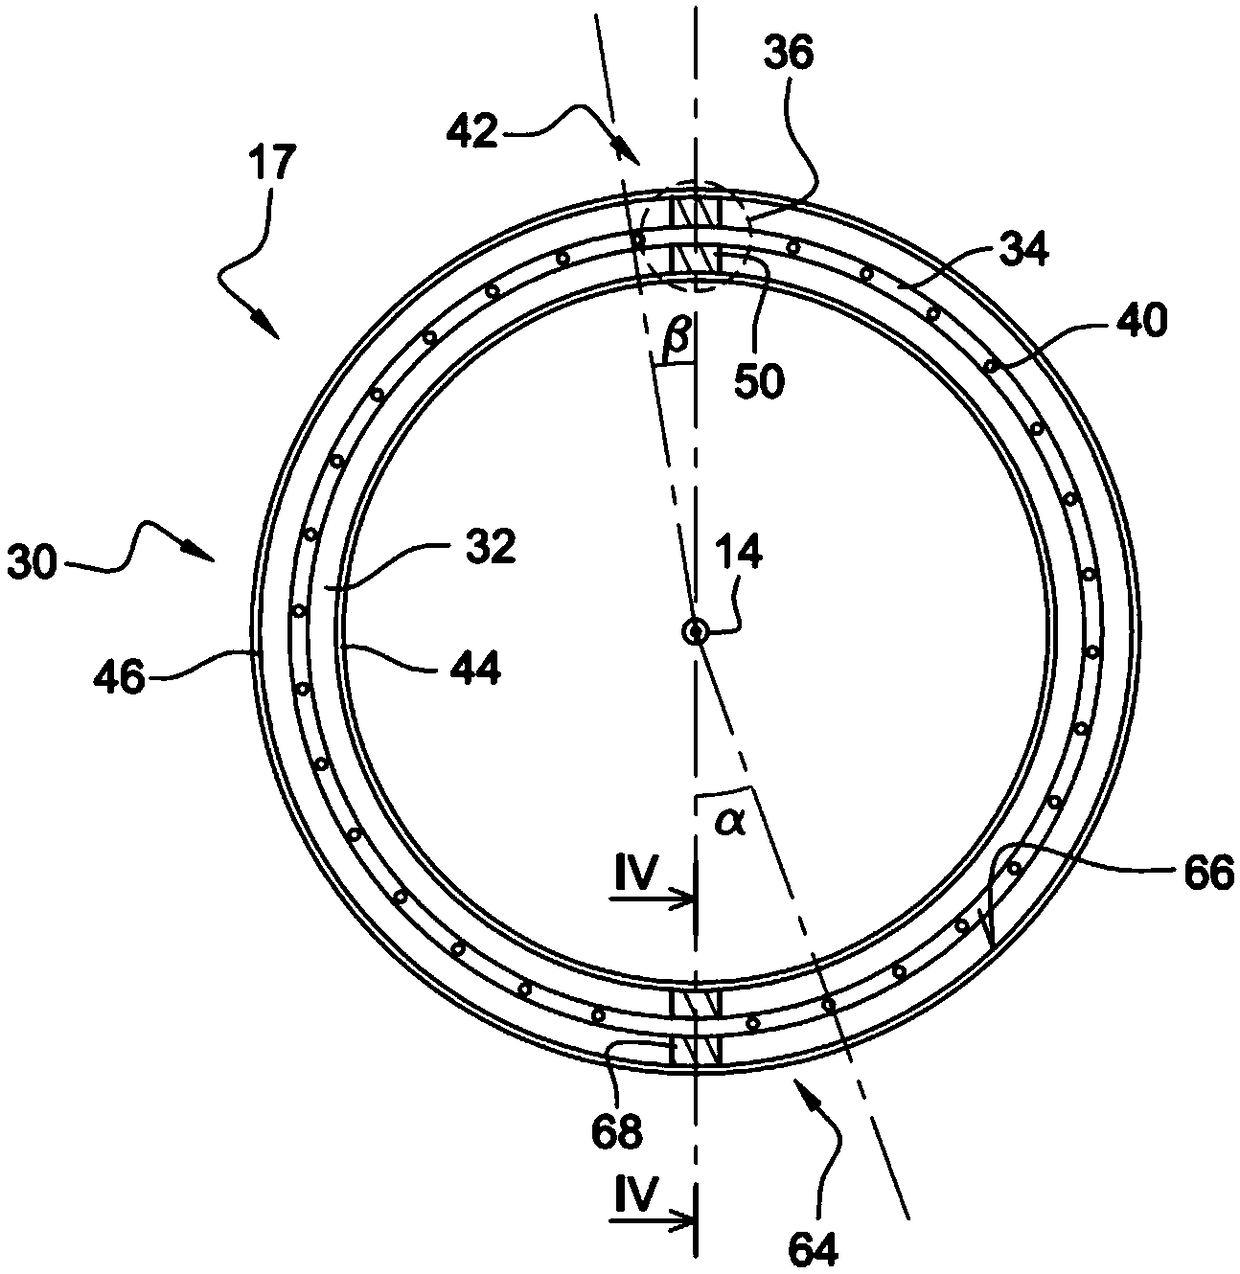 Split top end with annular de-icing duct for low pressure compressor of an axial turbine